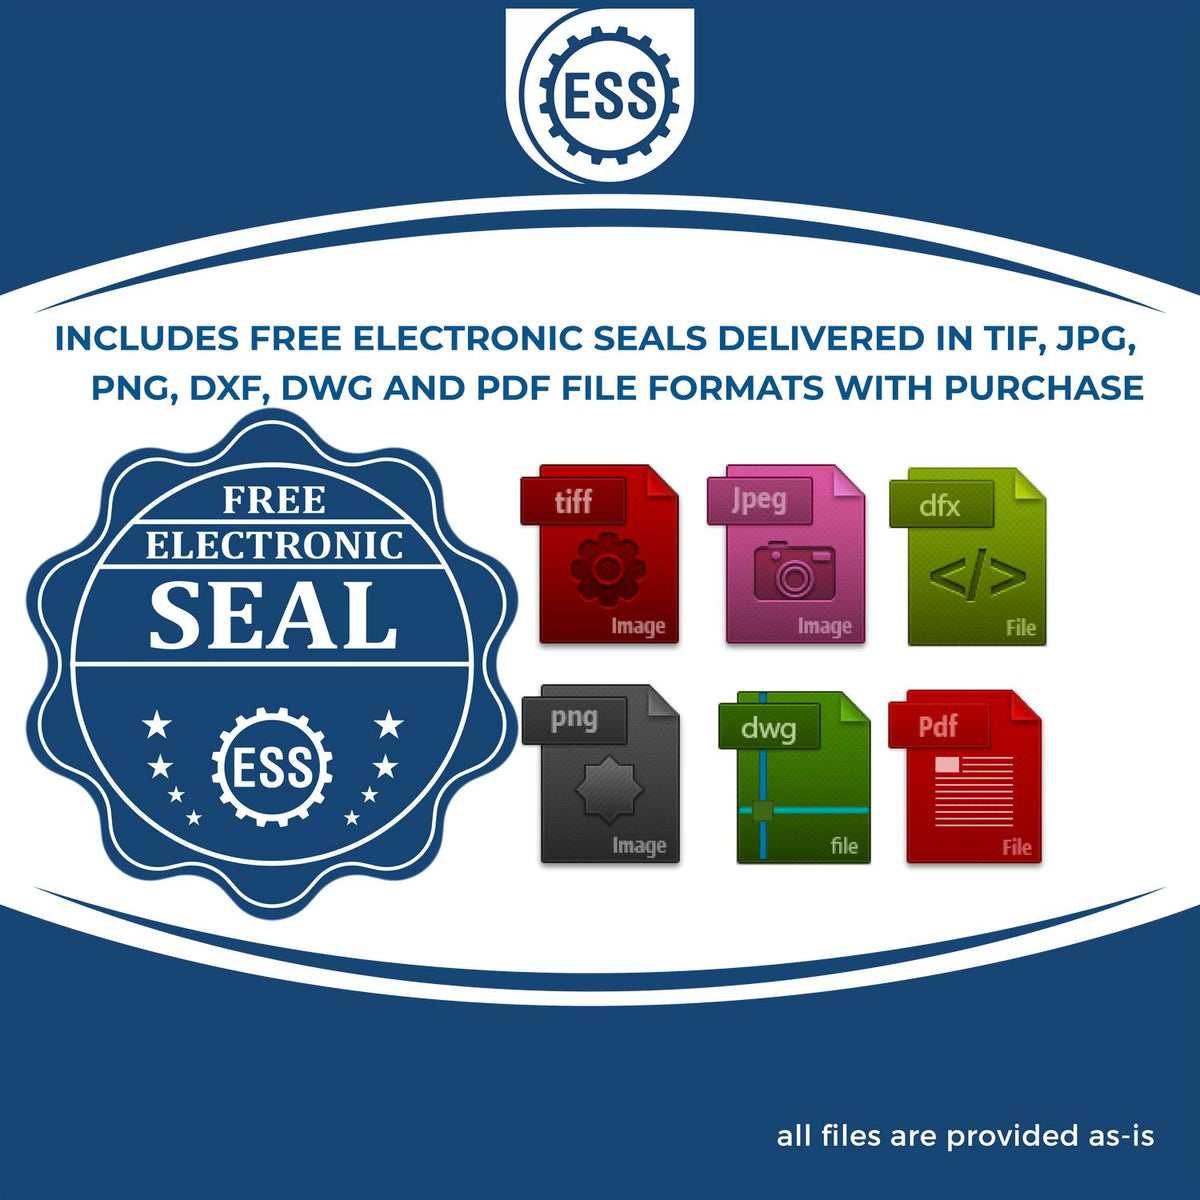 An infographic for the free electronic seal for the State of Pennsylvania Extended Long Reach Engineer Seal illustrating the different file type icons such as DXF, DWG, TIF, JPG and PNG.